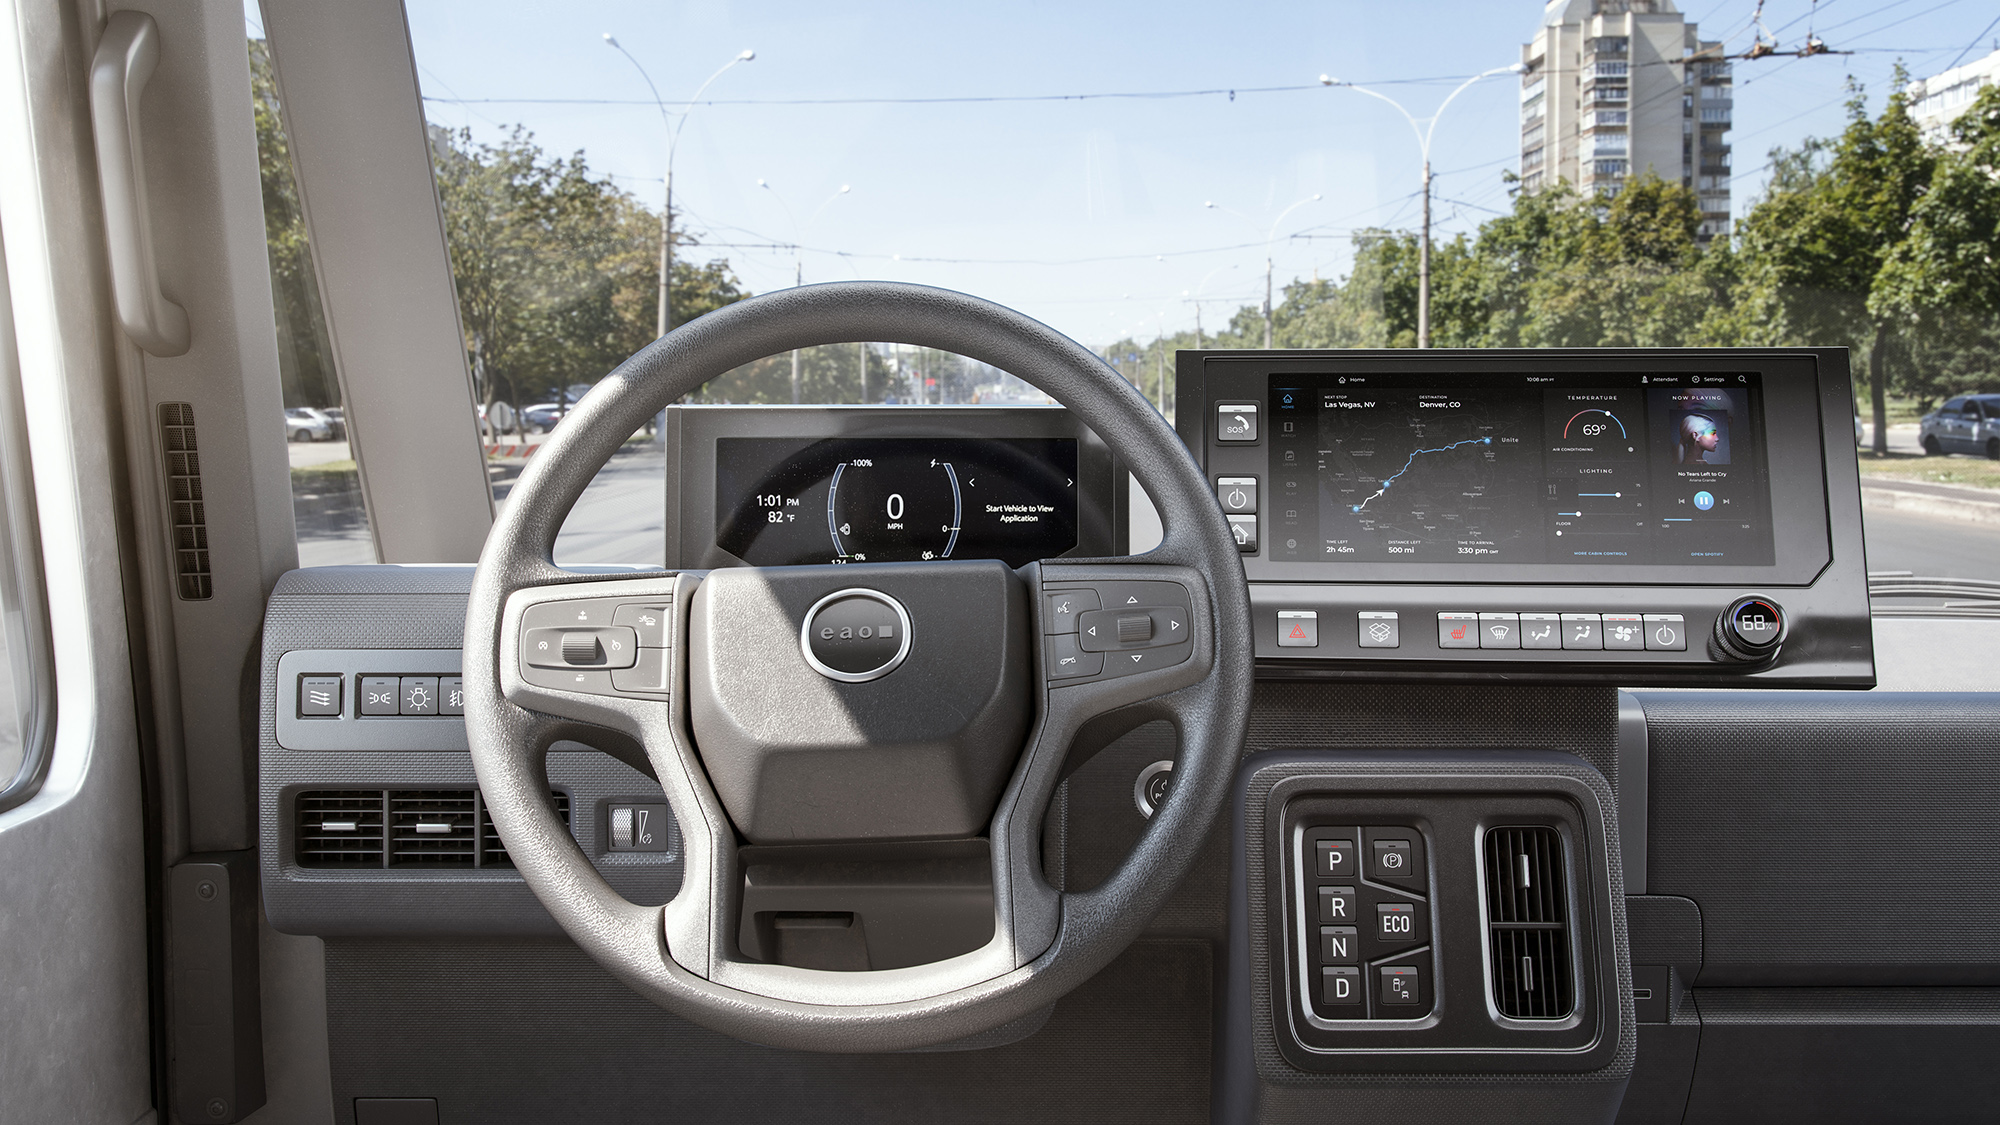 EAO – HMI for electric vehicles